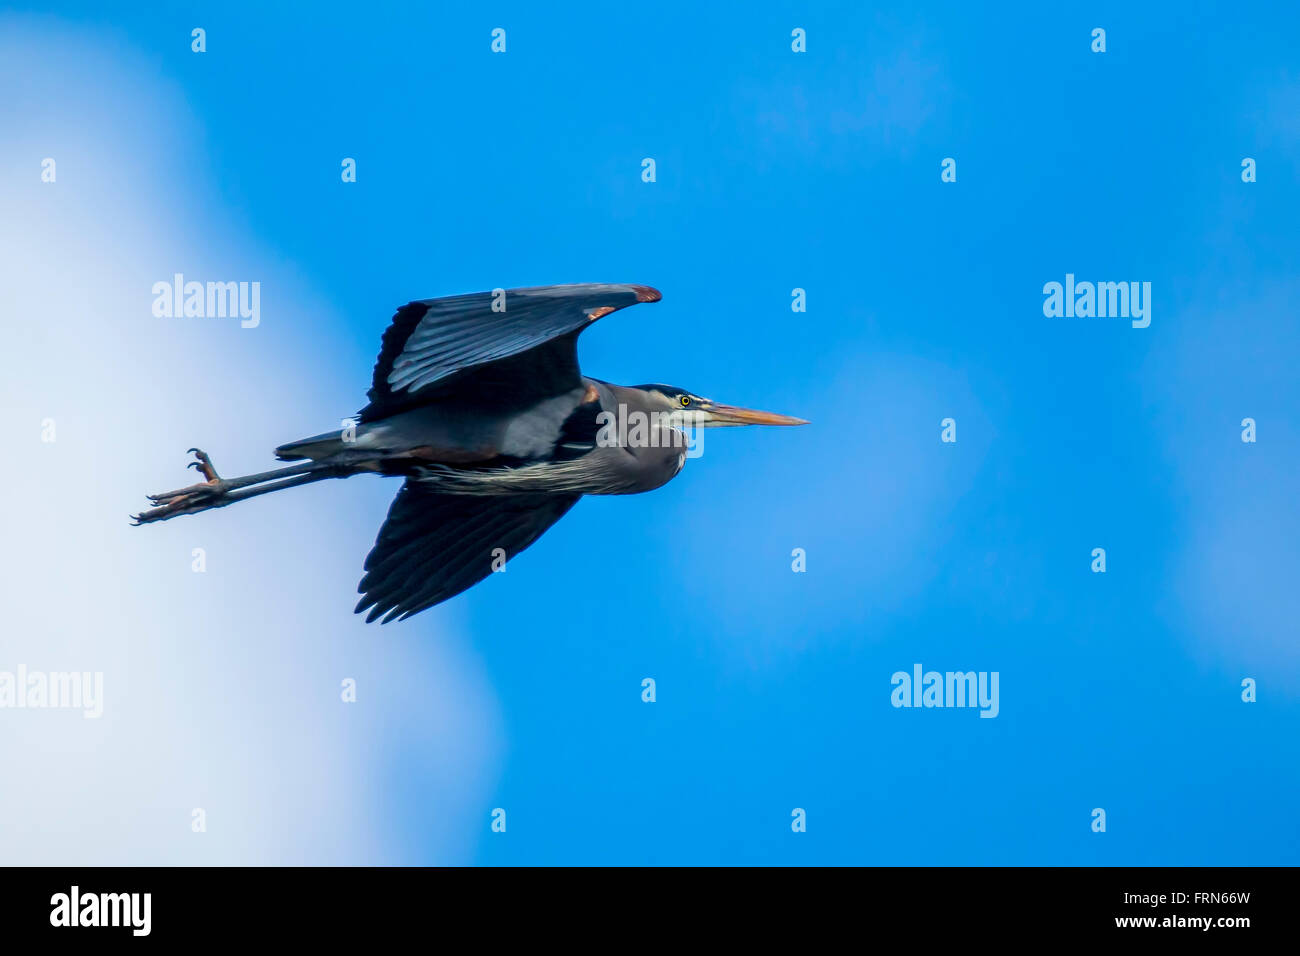 A great blue heron is flying up in the bright blue sky. Stock Photo